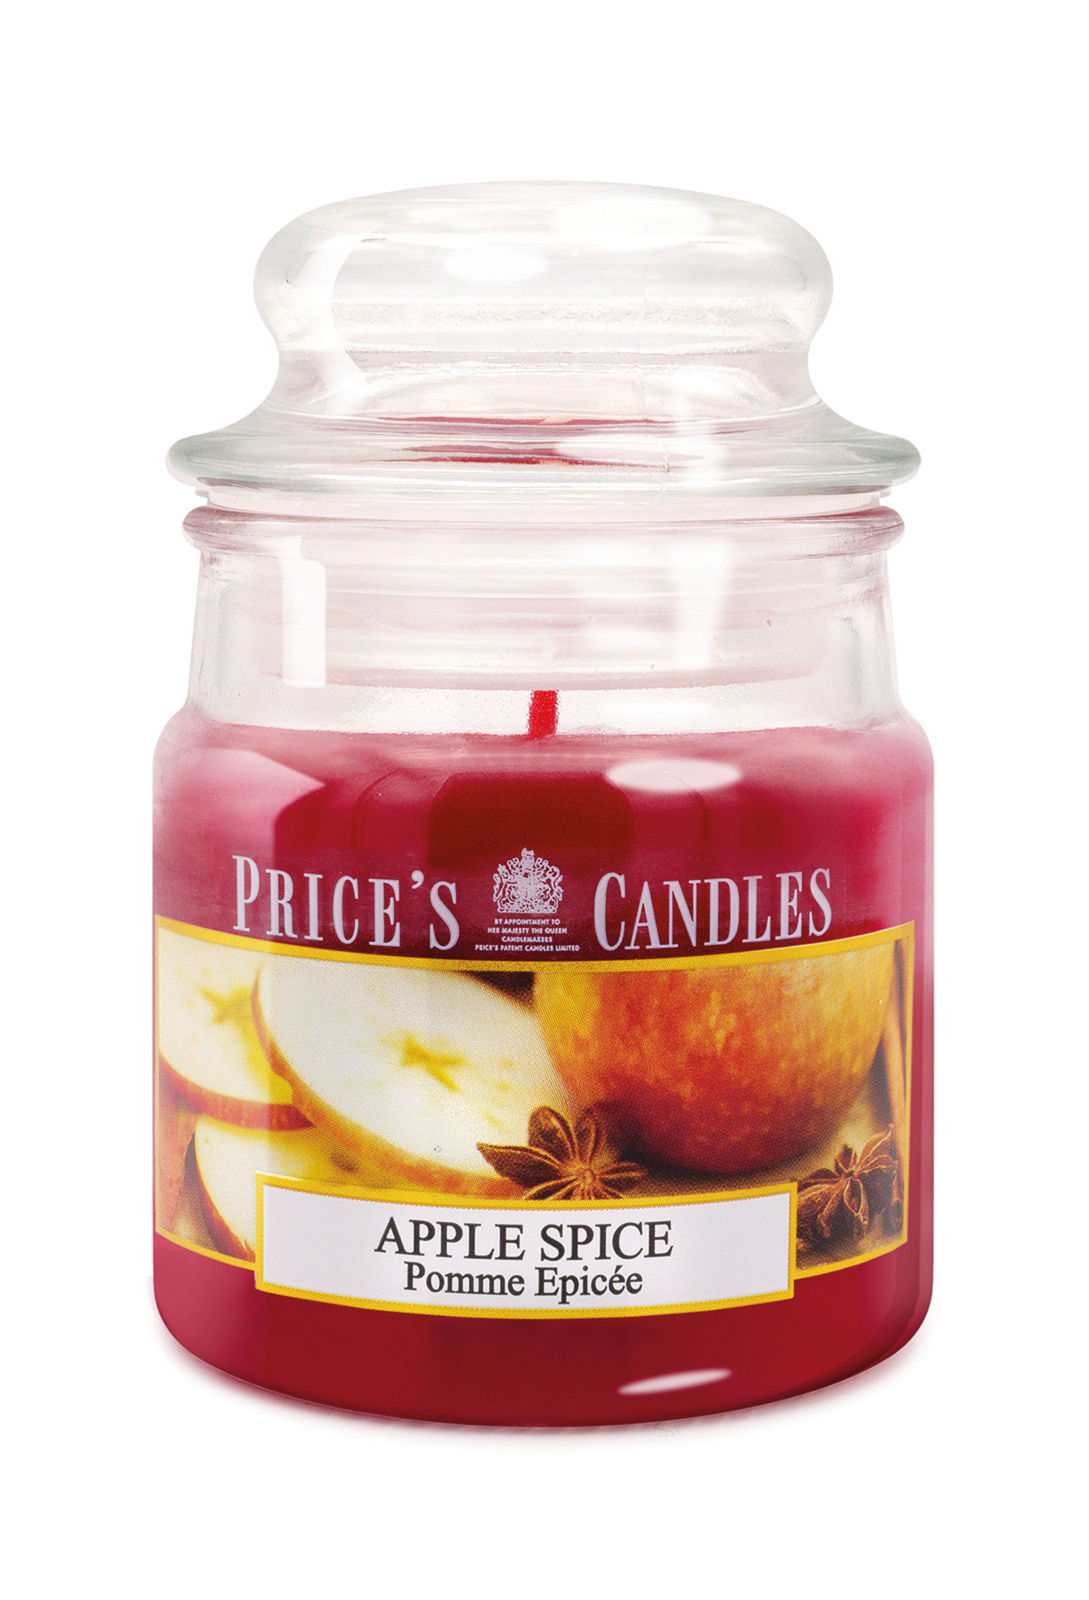 Prices Candle "Apple Spice" 100g